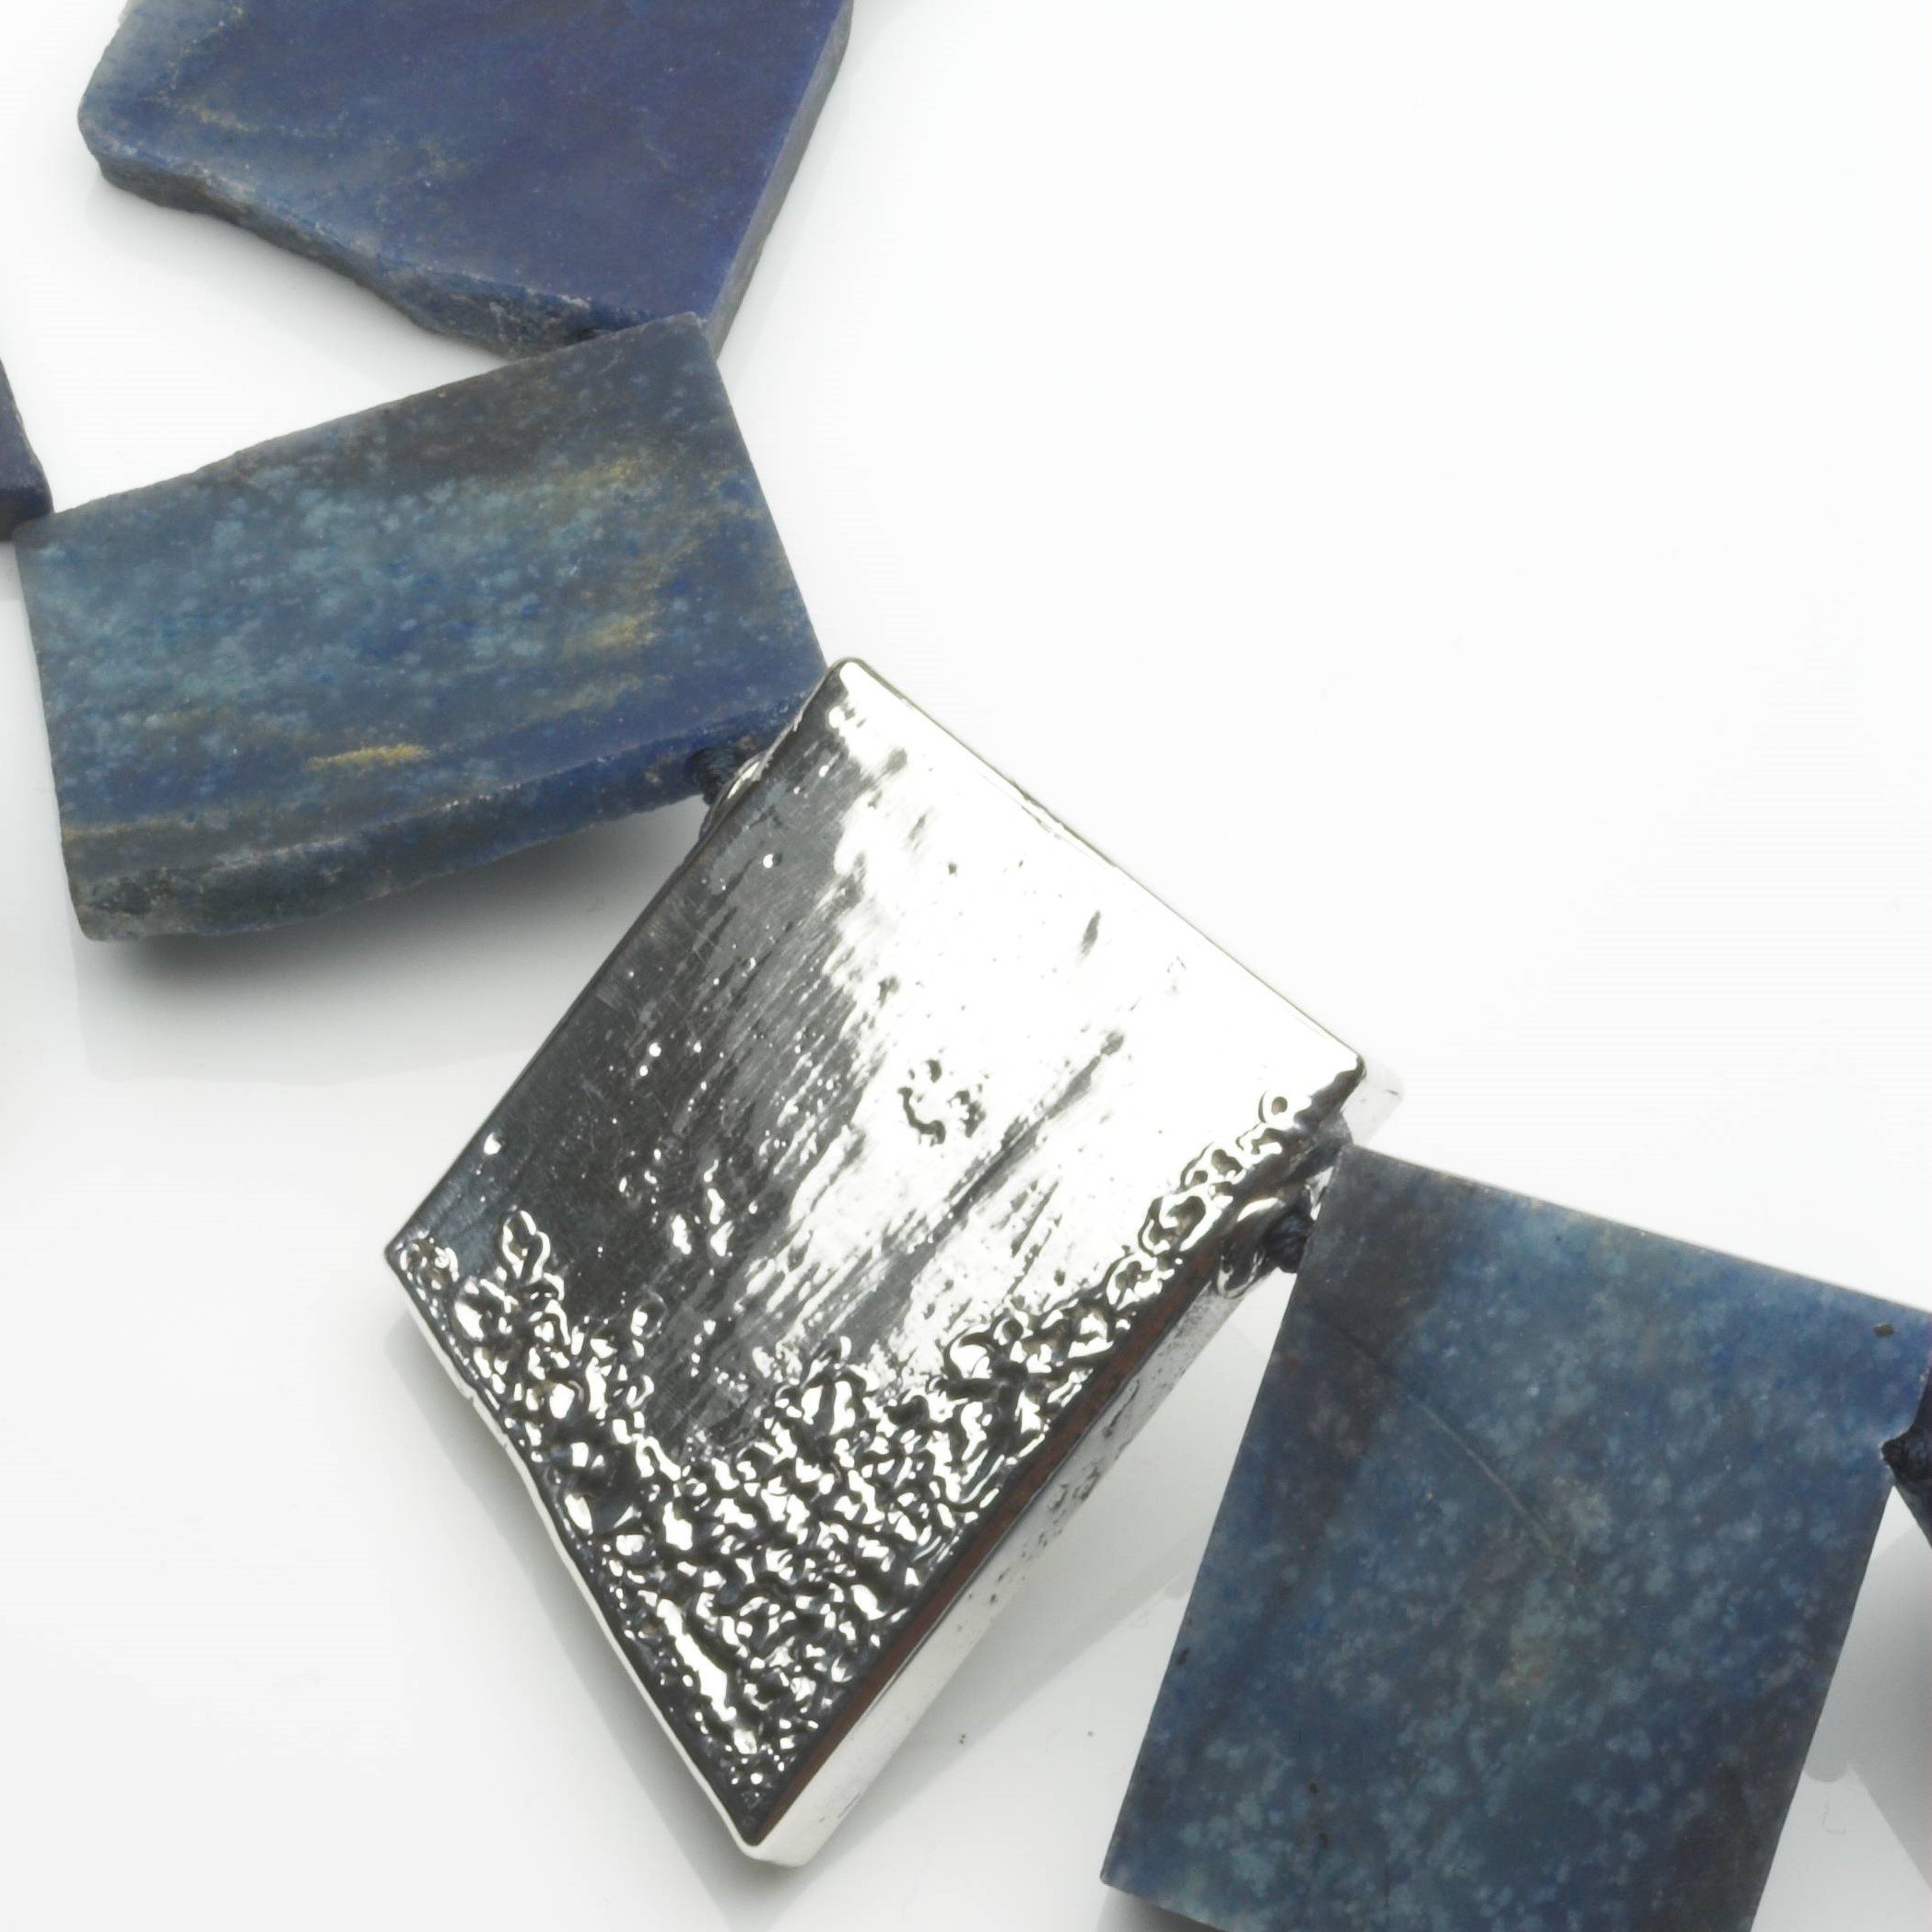 Blue Aventurine Necklaces with Silver hallmarked shapes £690 and £790 (2).jpg